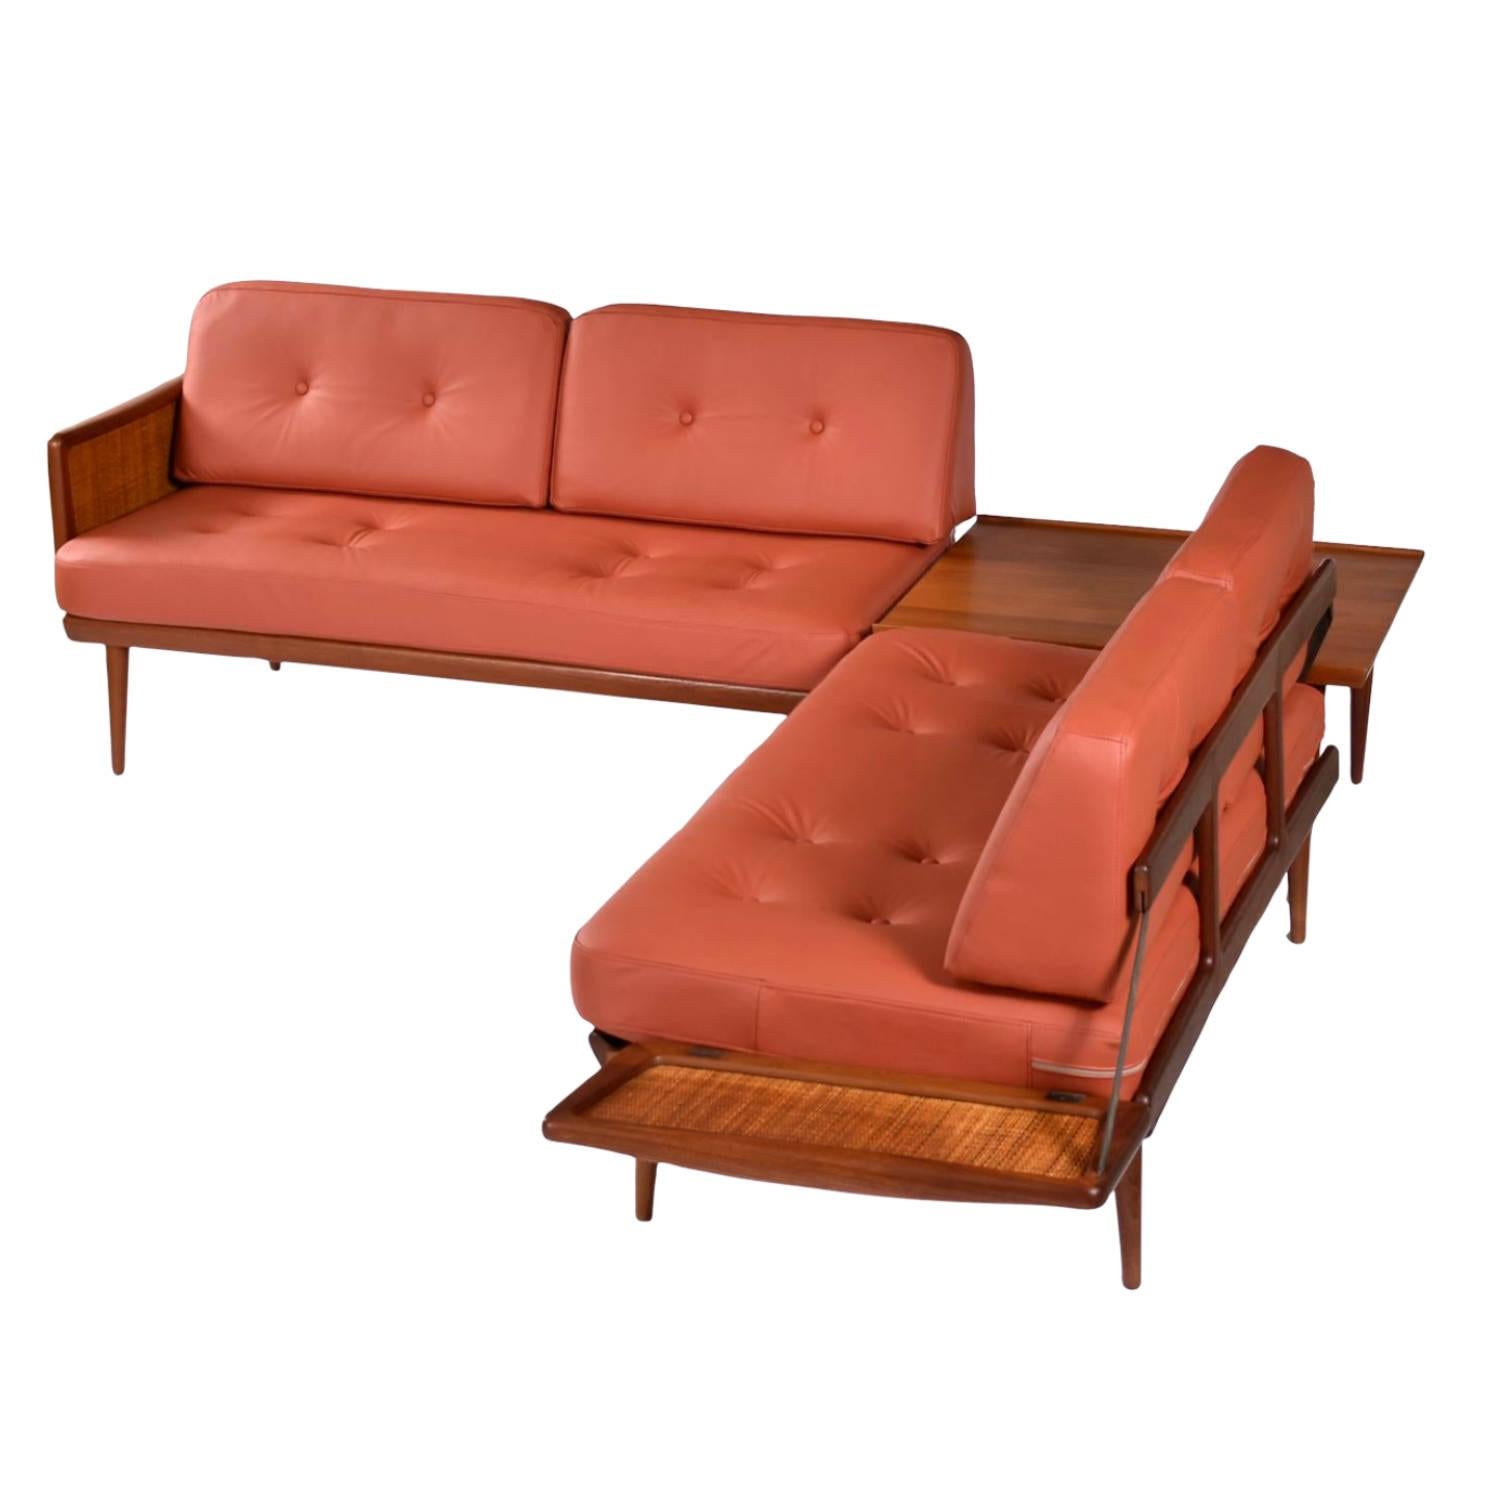 Peter Hvidt and Orla Mølgaard created many enduring and sought-after modern Scandinavian designs. This leather sofa set is an archetypal example of their mastery.  Lovingly restored, Mid-Century Modern FD451 daybed sofas set designed by Peter Hvidt